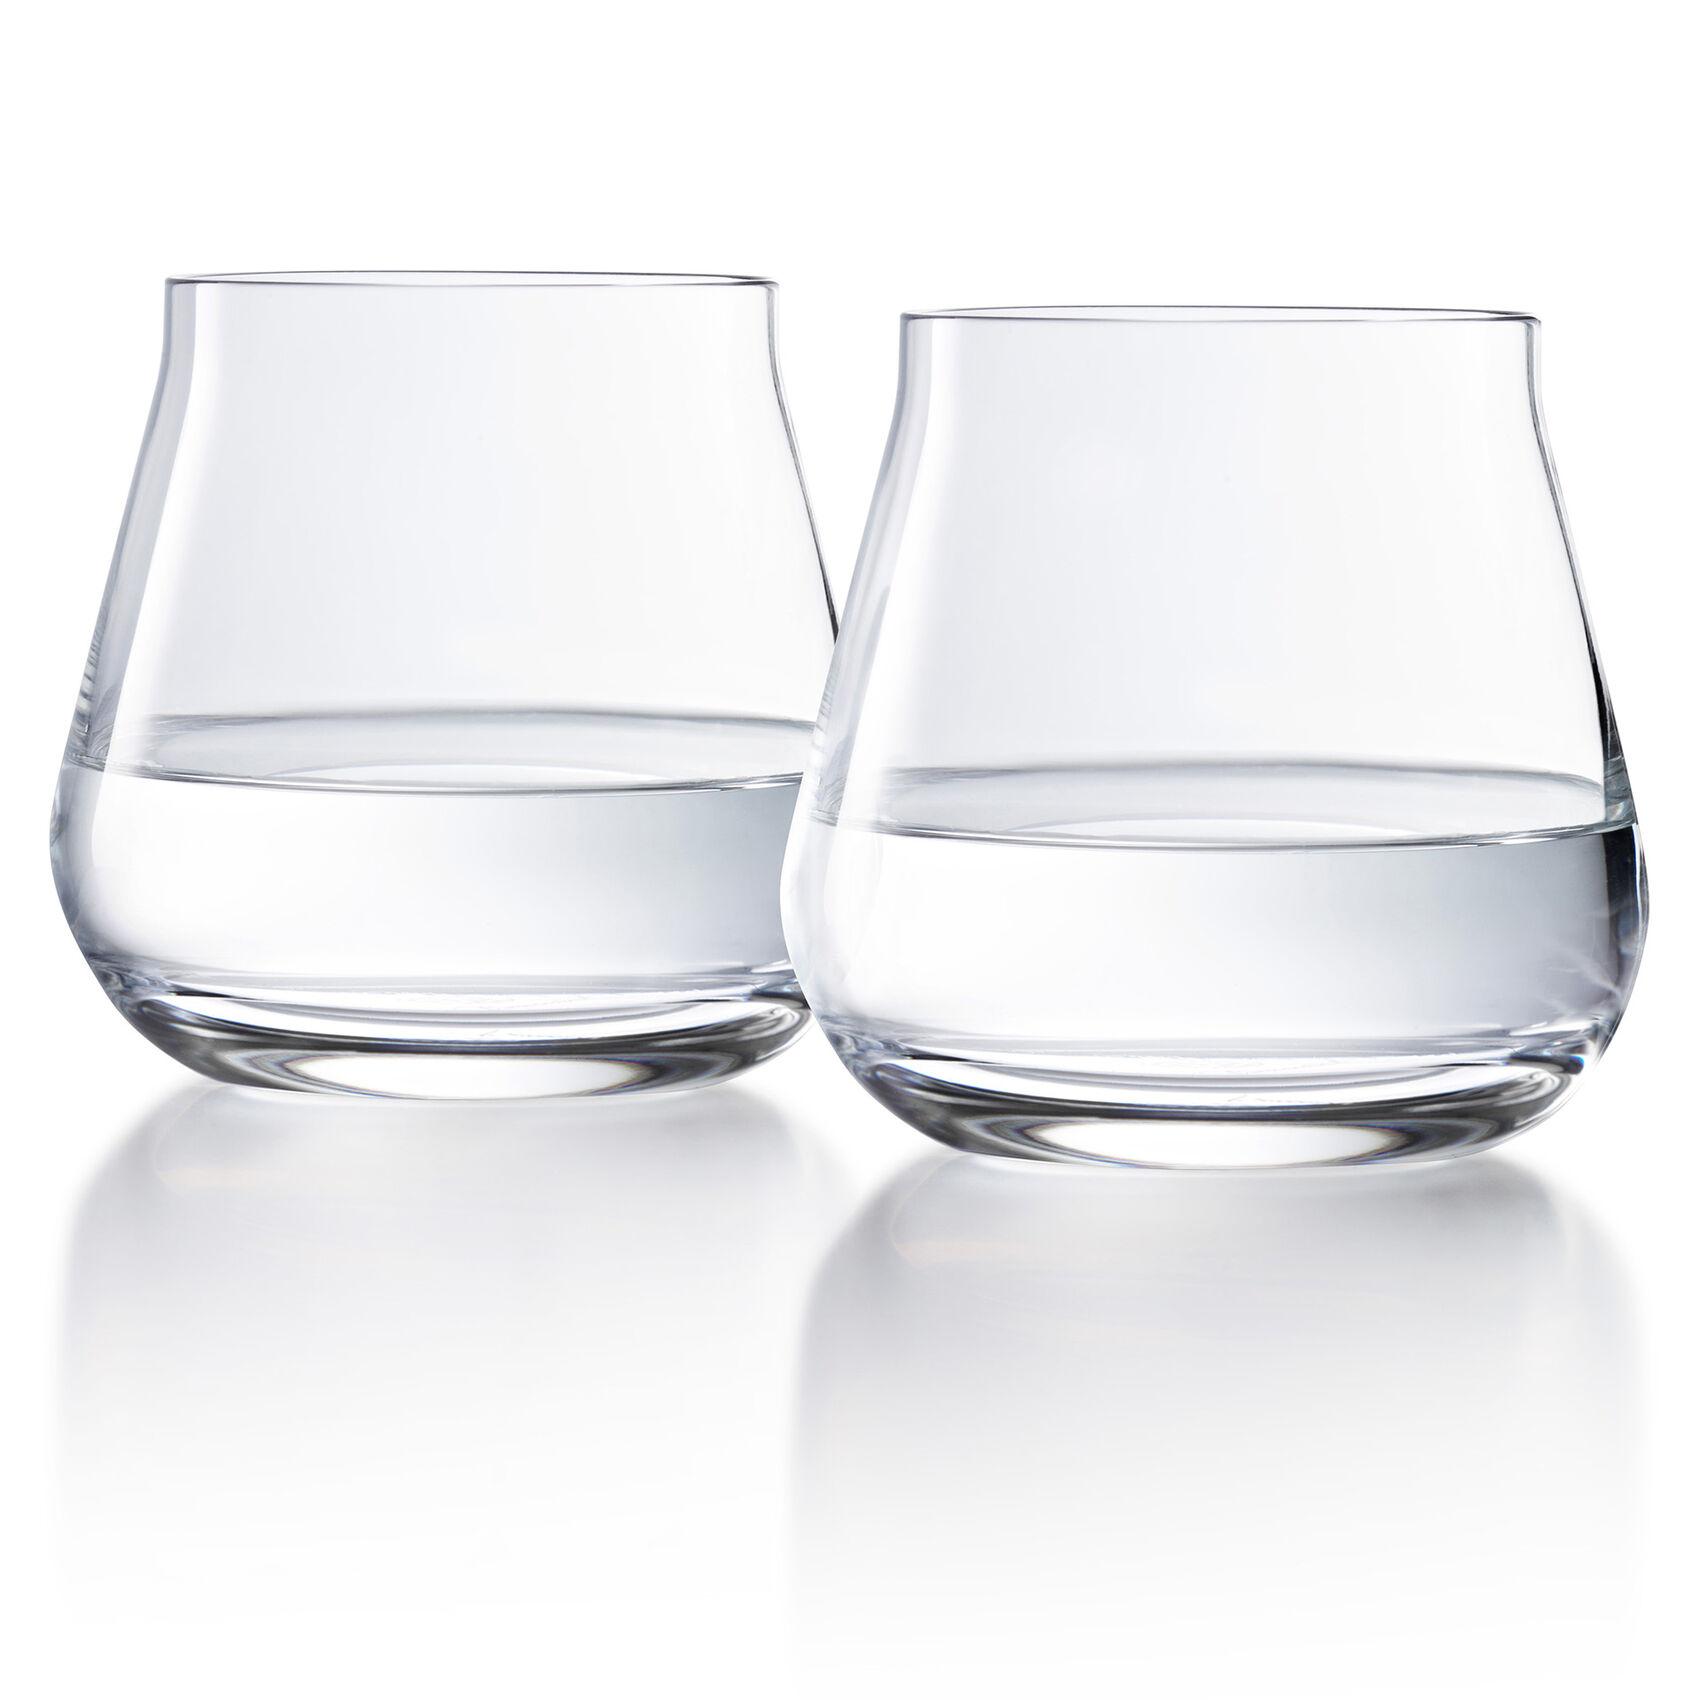 Baccarat Chateau Small Tumblers, set of two